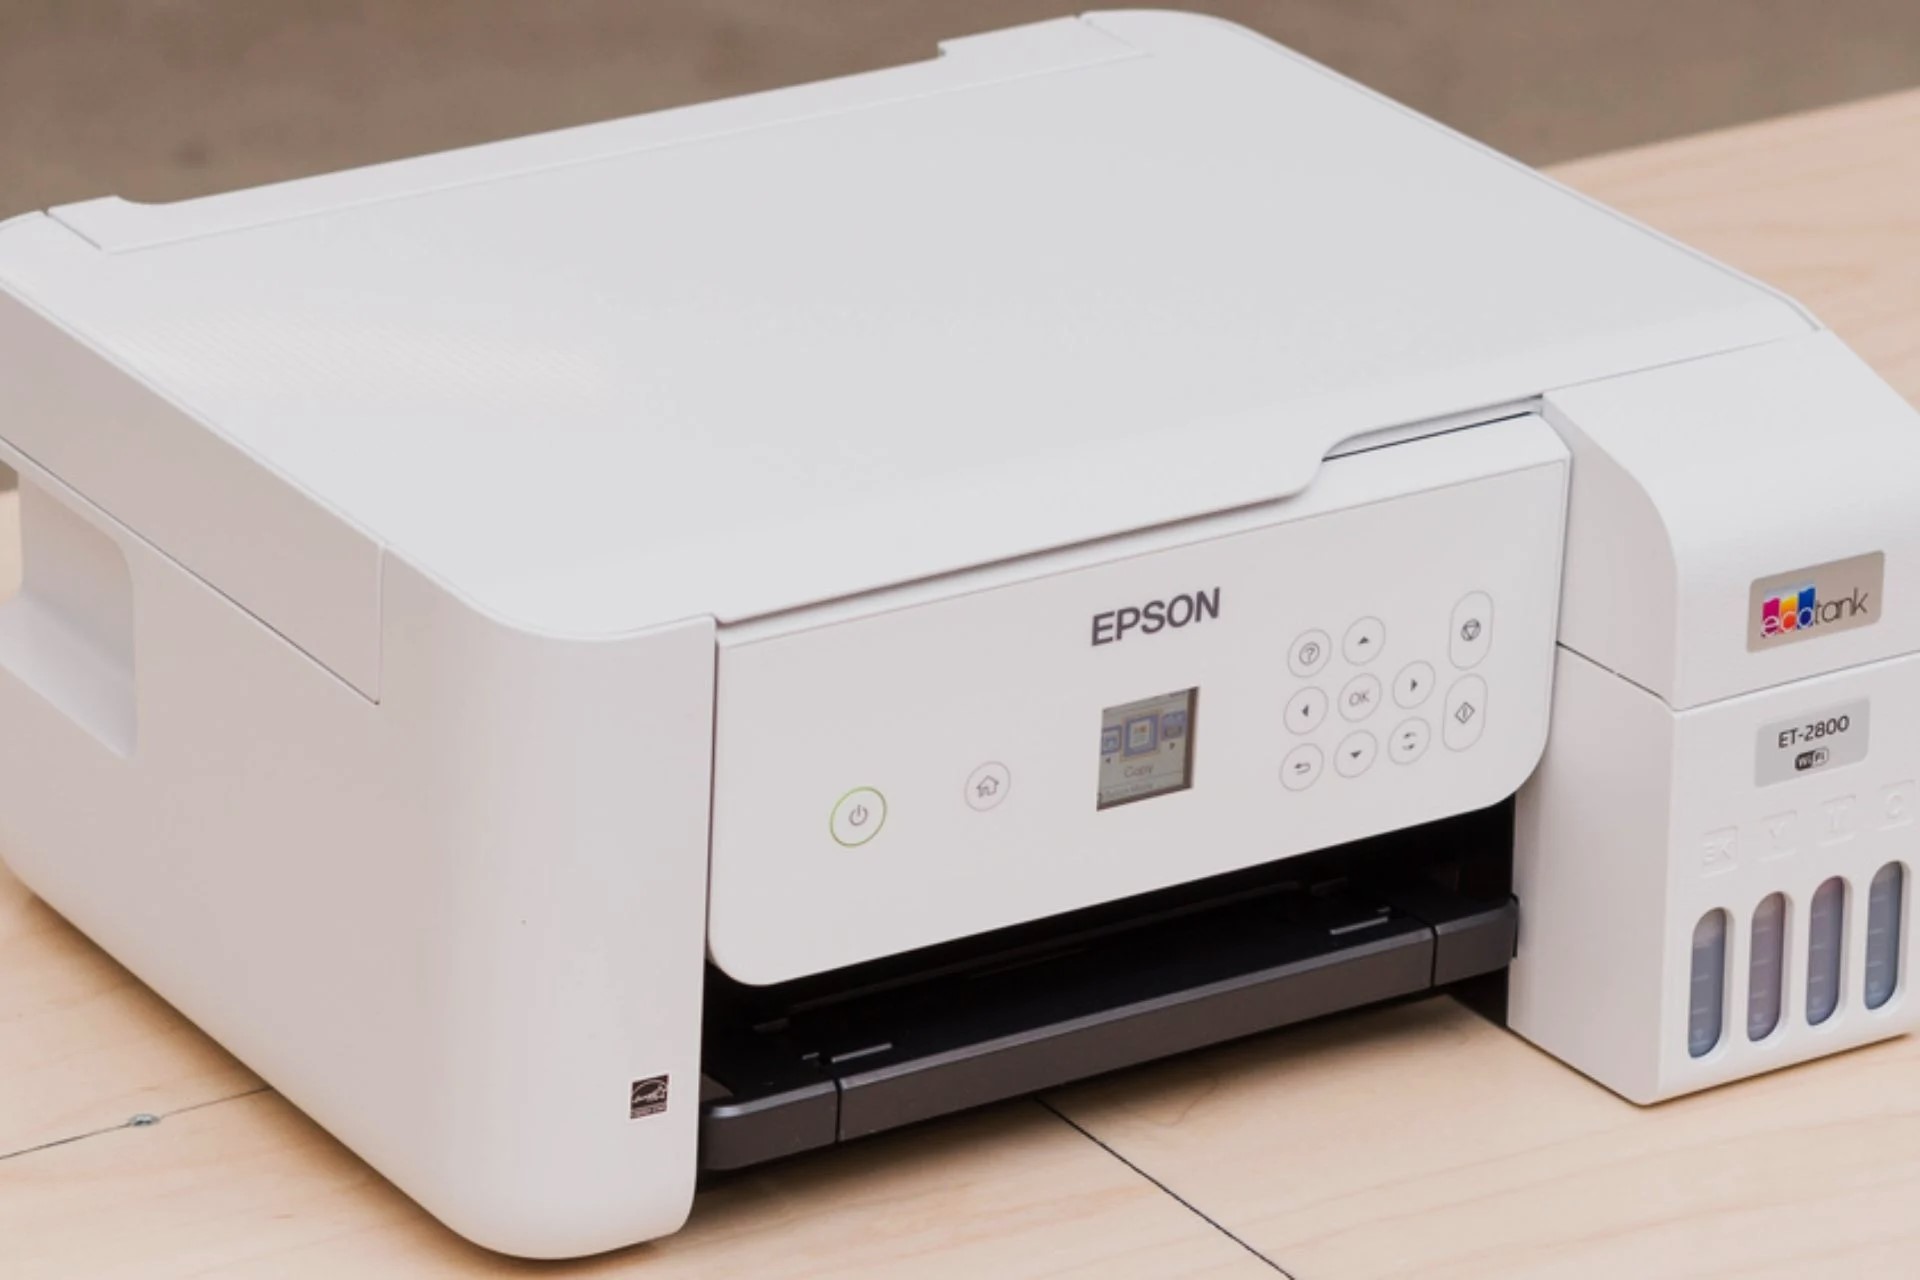 How To Update Epson Printer Firmware